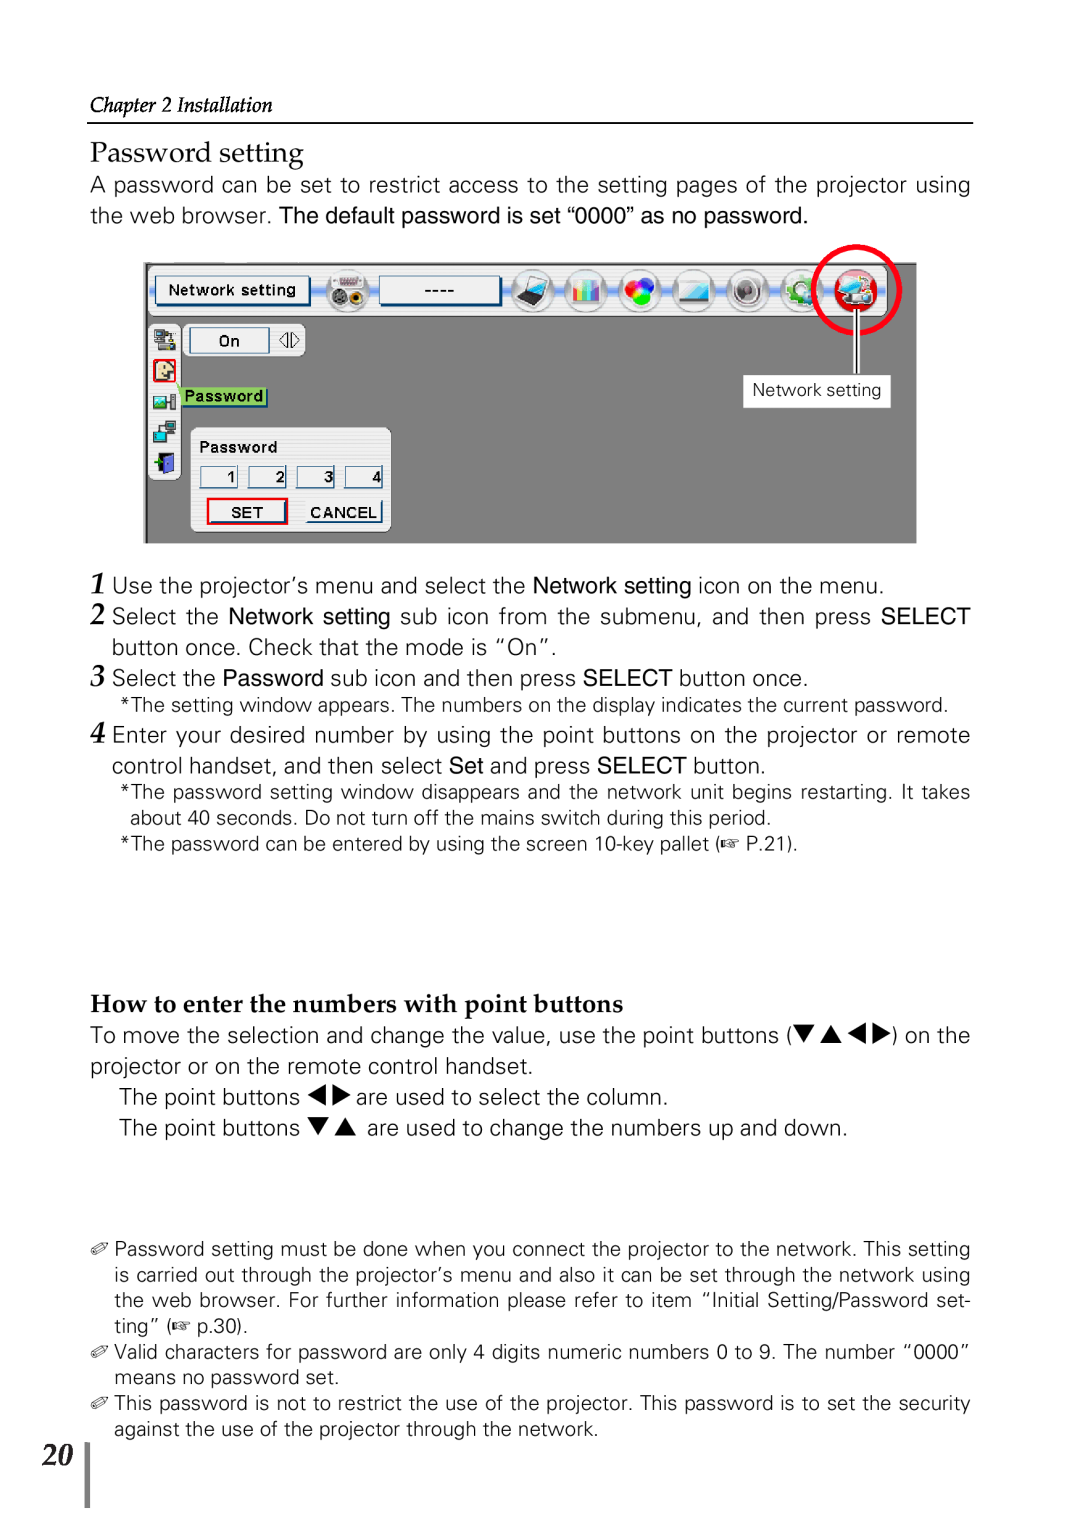 Sanyo POA-PN02 owner manual Password setting, How to enter the numbers with point buttons 